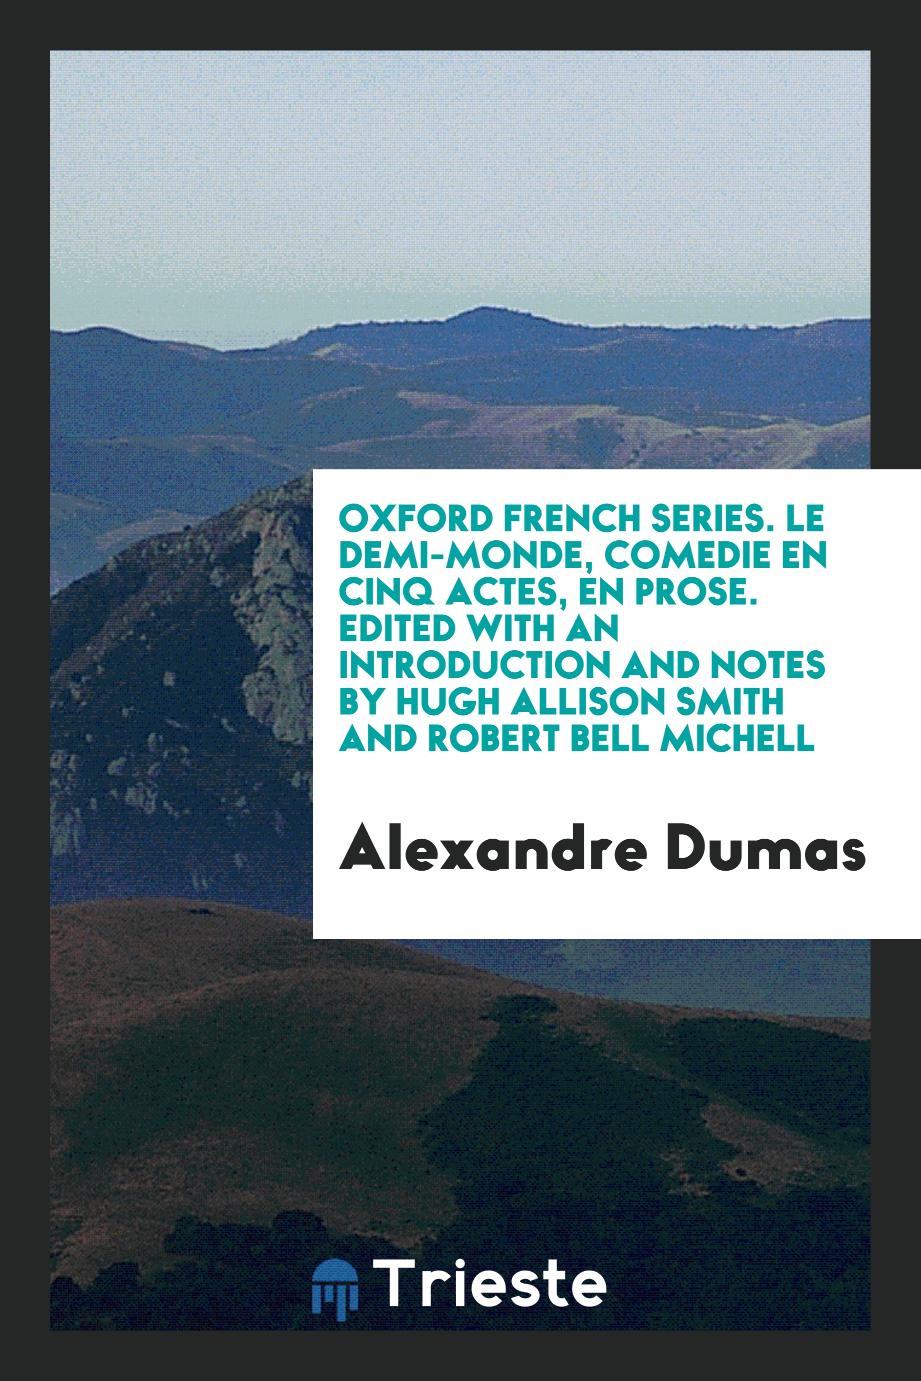 Oxford French Series. Le demi-monde, comedie en cinq actes, en prose. Edited with an introduction and notes by Hugh Allison Smith and Robert Bell Michell